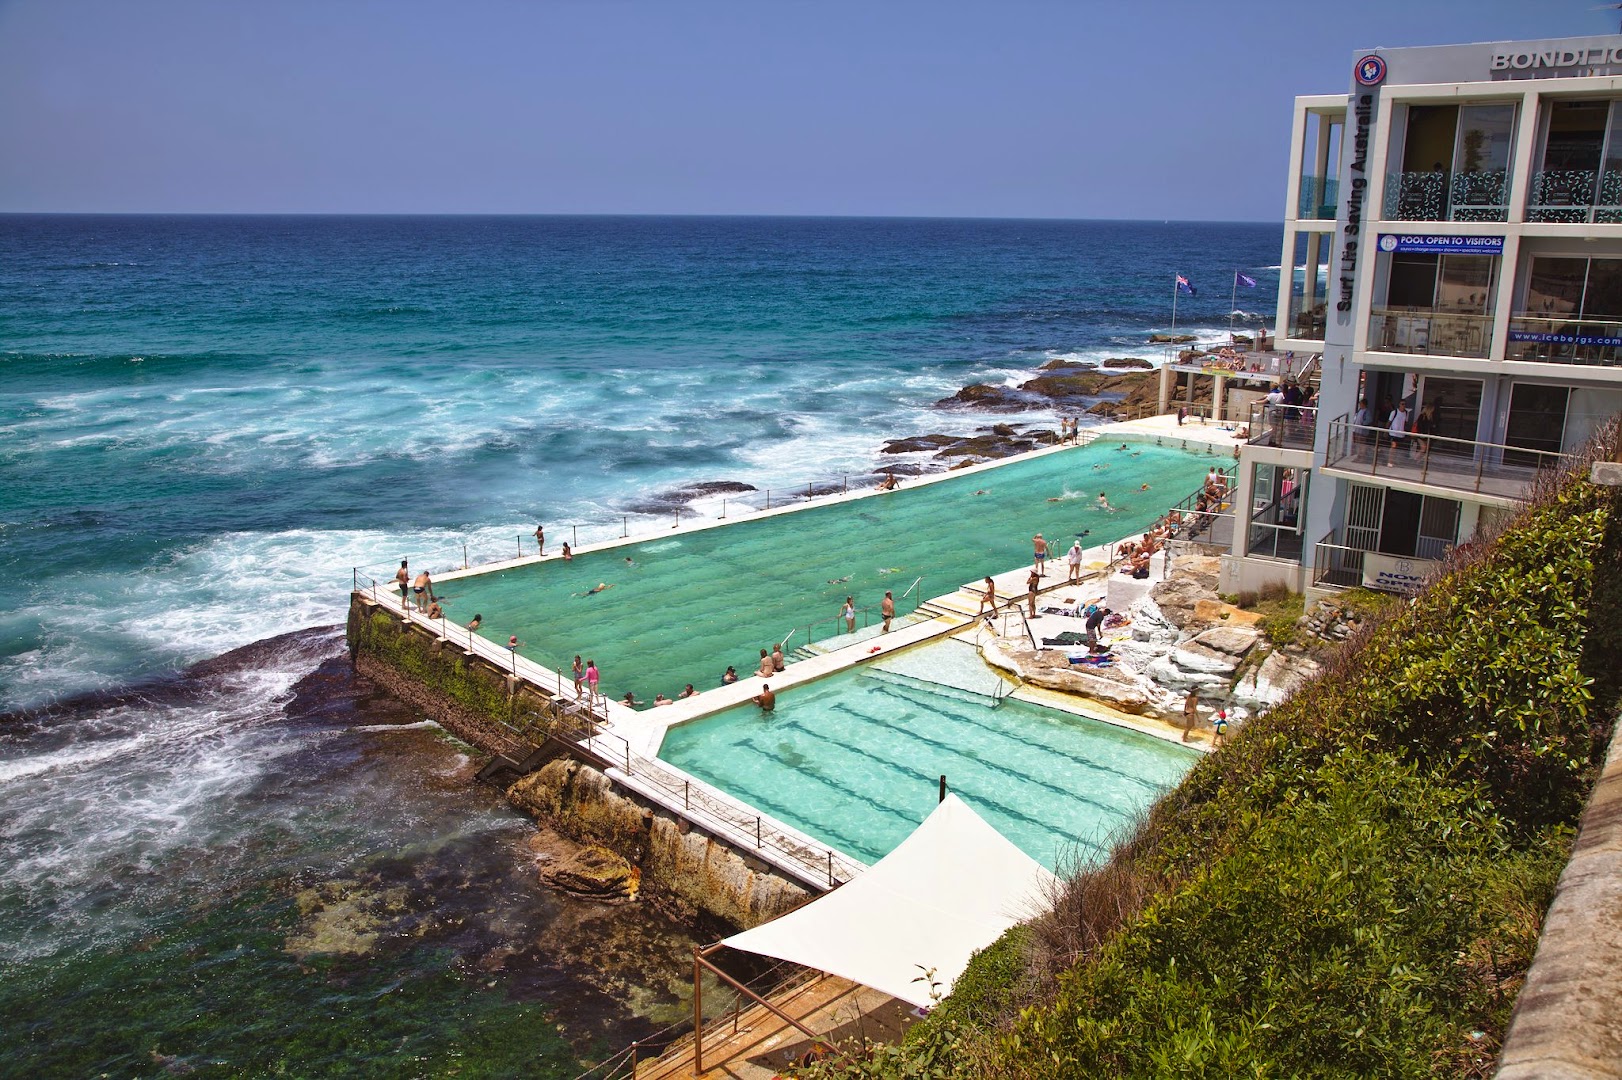 Australians like to make pools by the ocean